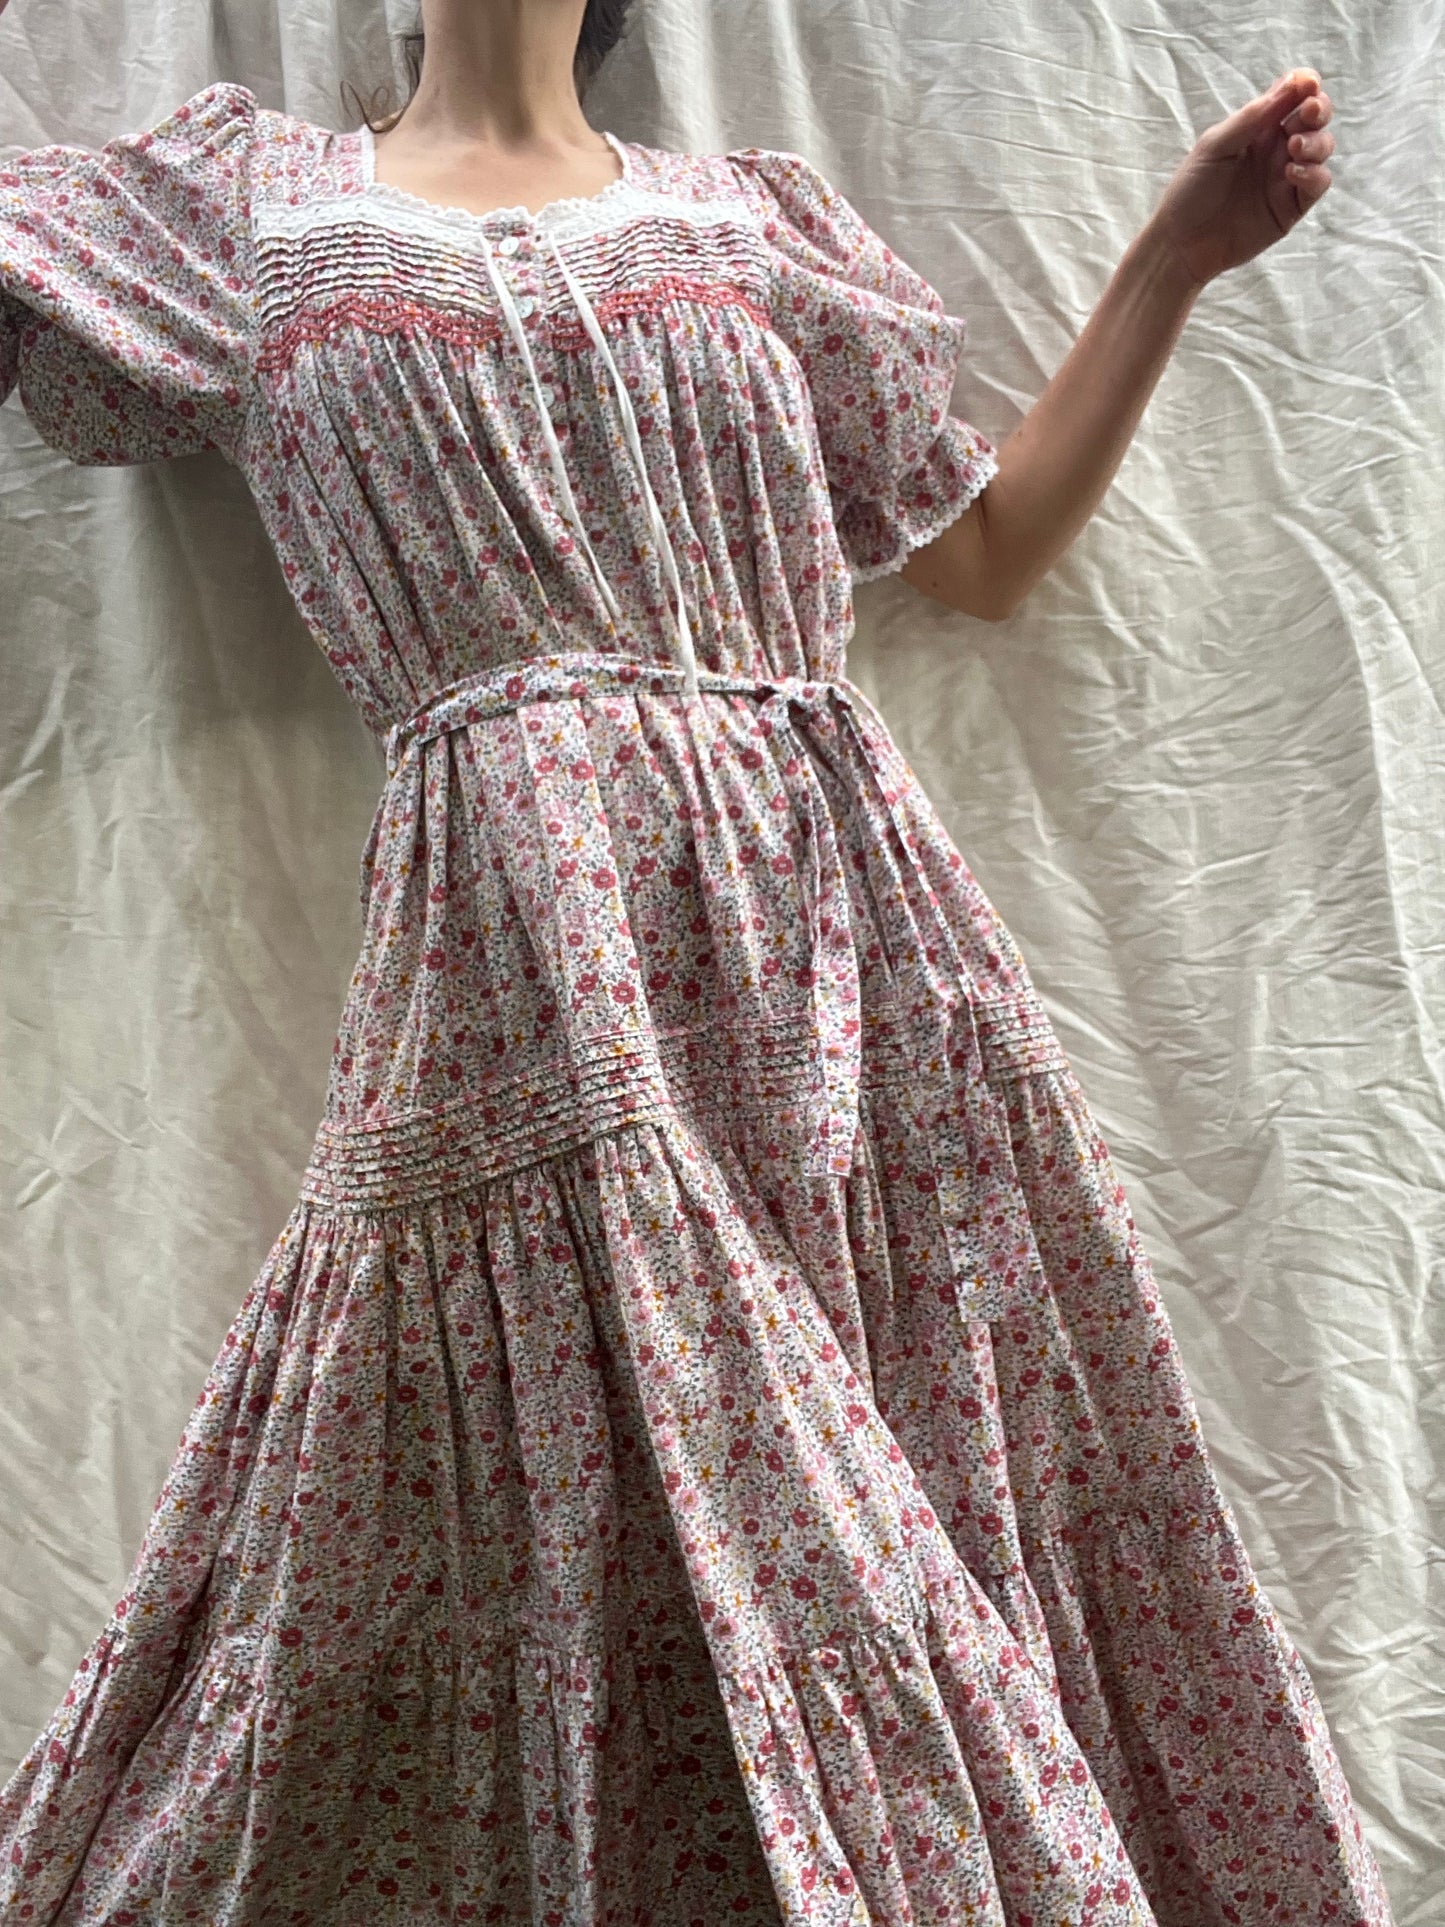 100% RECYCLED COTTON - MORNING SONG HAND SMOCKED TIERED DRESS - PINK DITSY FLORAL